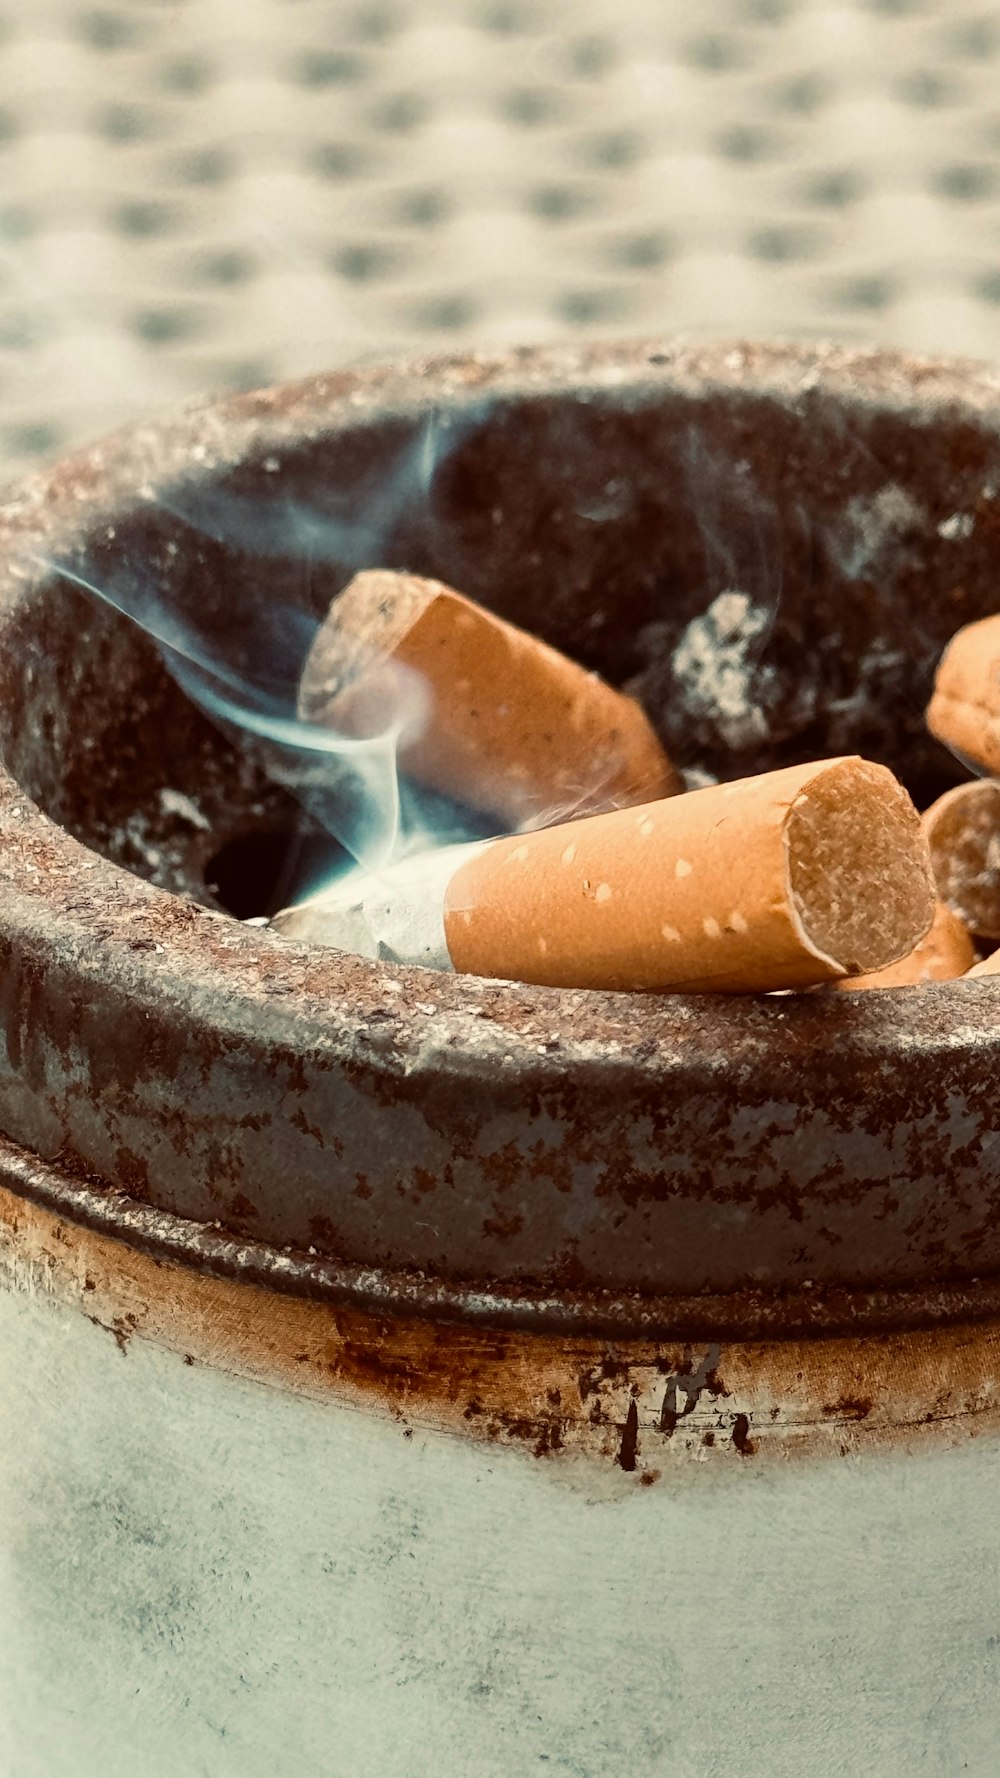 a close up of a bowl with a cigarette in it